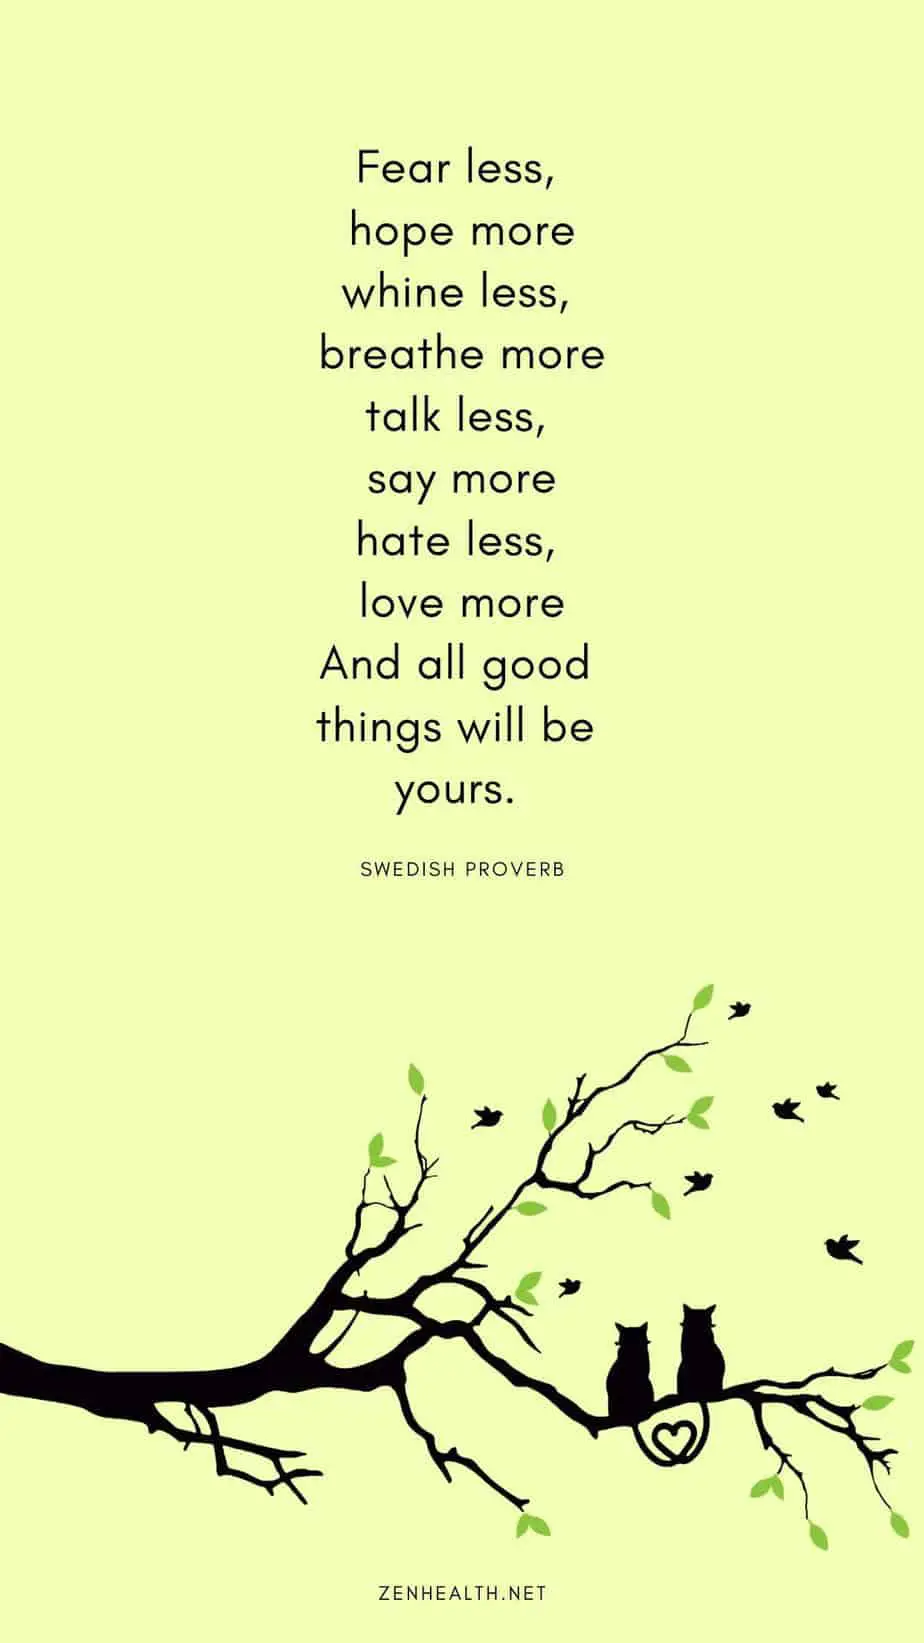 Fear less, hope more, Whine less, breathe more, Talk less, say more, Hate less, love more, And all good things will be yours. - Swedish proverb